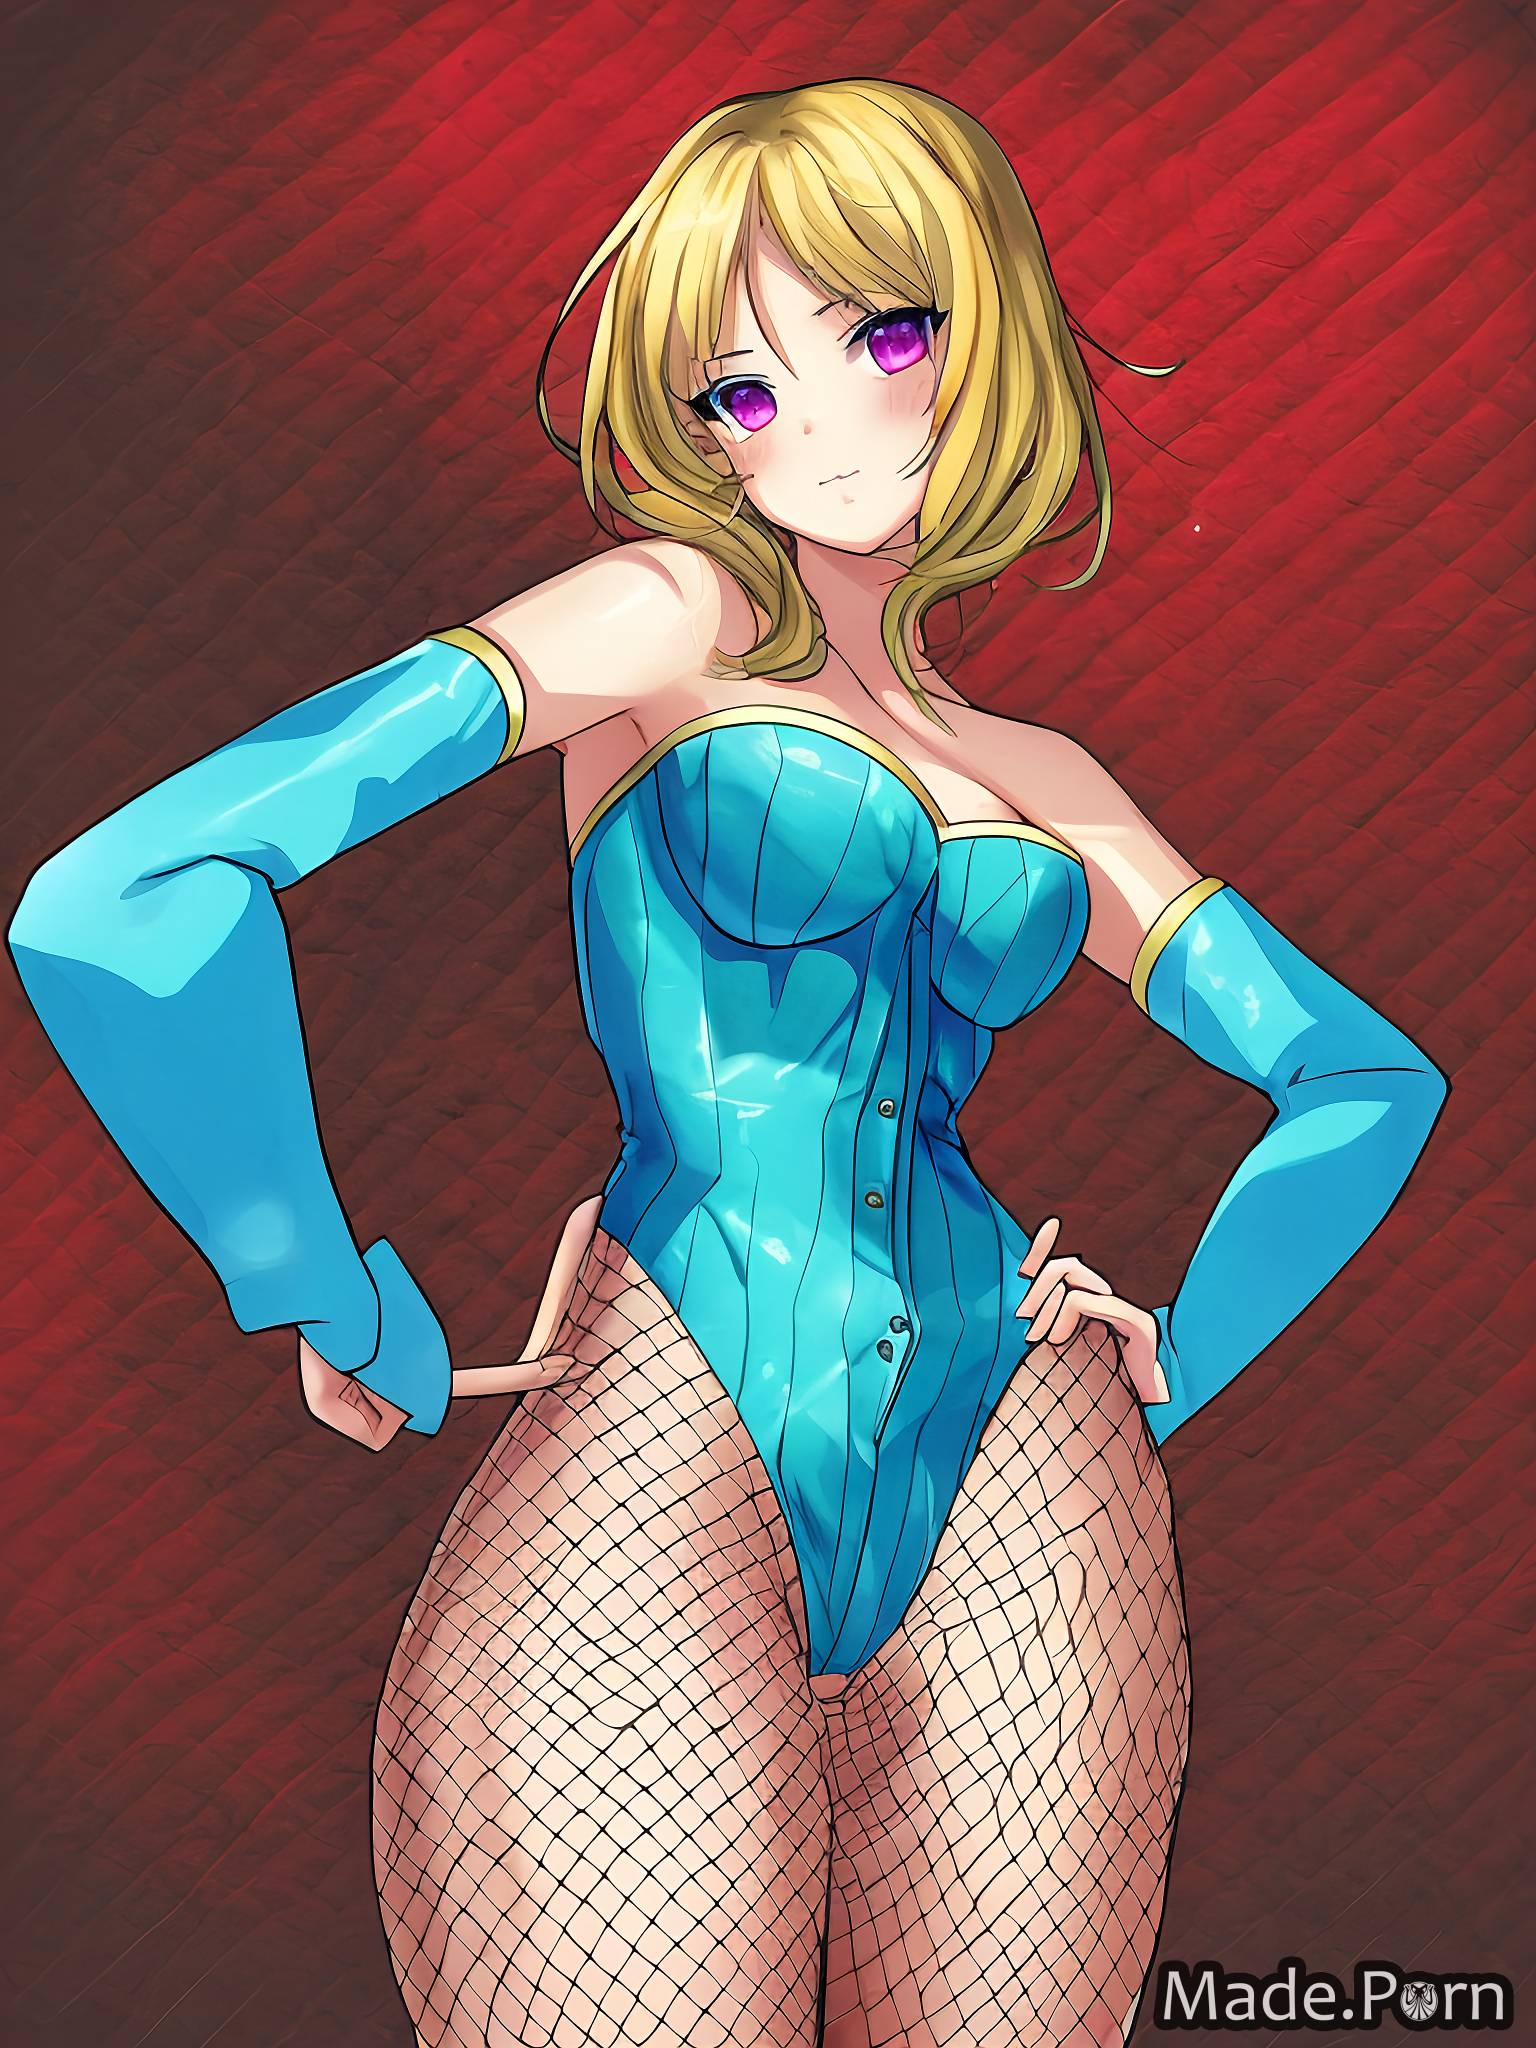 Anime Porn Fishnet - Porn image of fishnet anime 20 woman created by AI